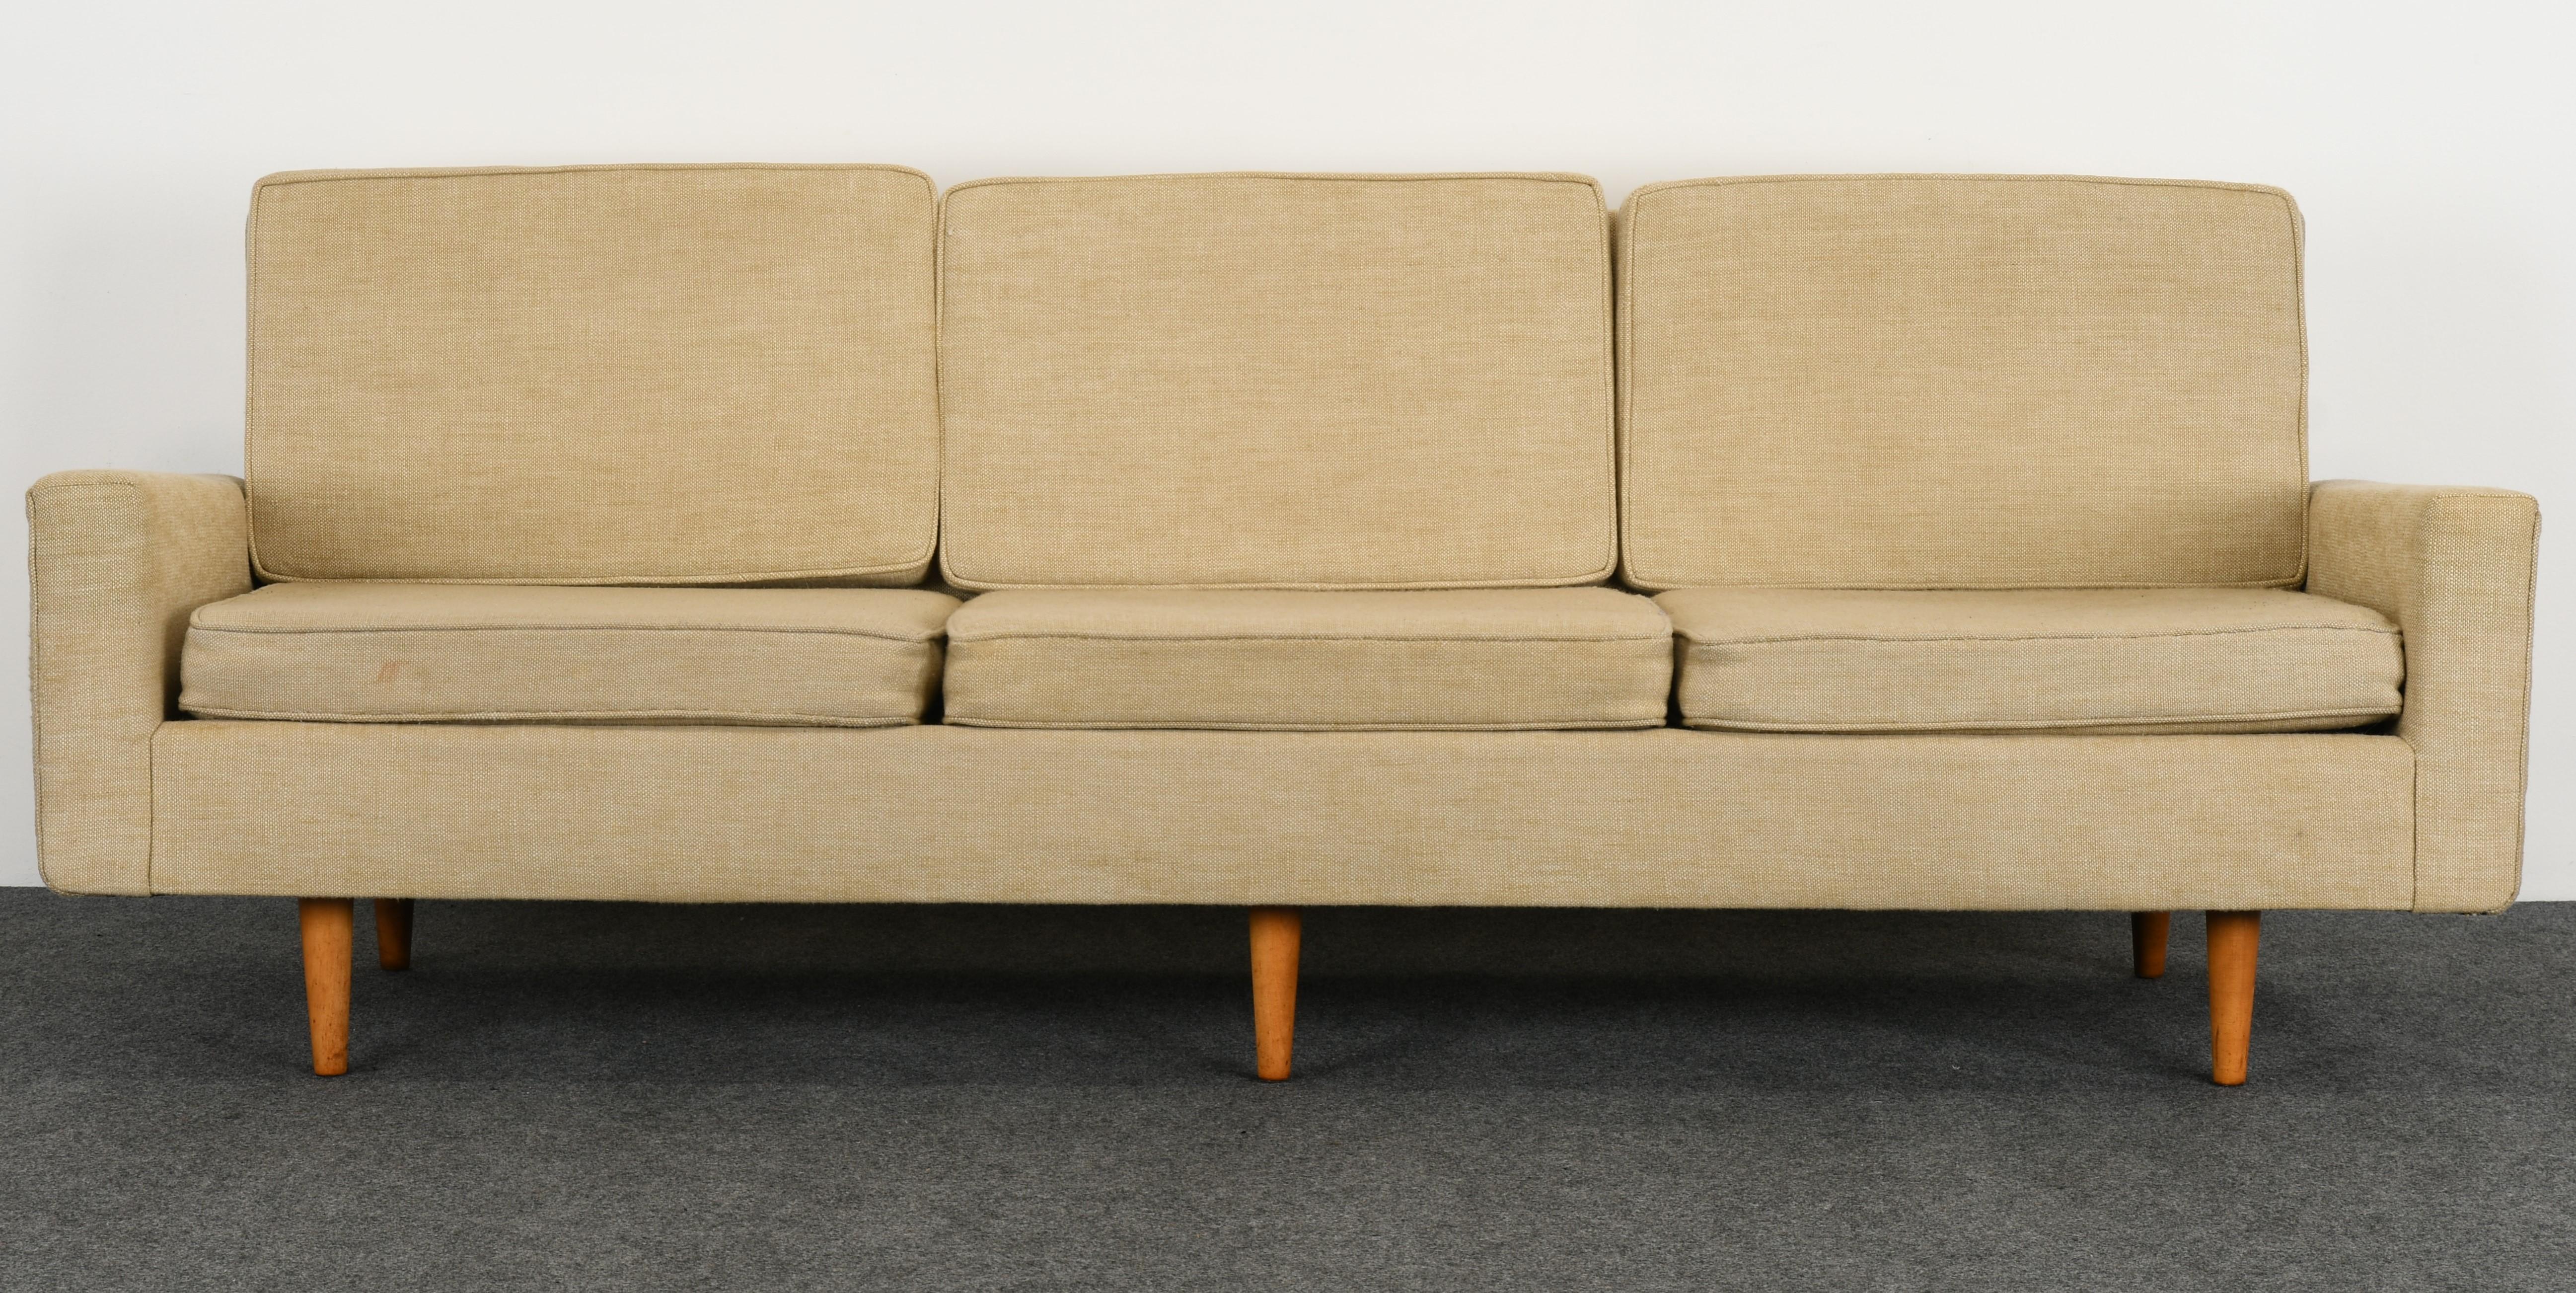 A Classic three-seat Knoll Sofa Model #26 designed by Florence Knoll was produced circa 1947-1970. Upholstered in natural linen, however, new upholstery is necessary. Great modern and classic form. This sofa is sturdy and structurally sound.